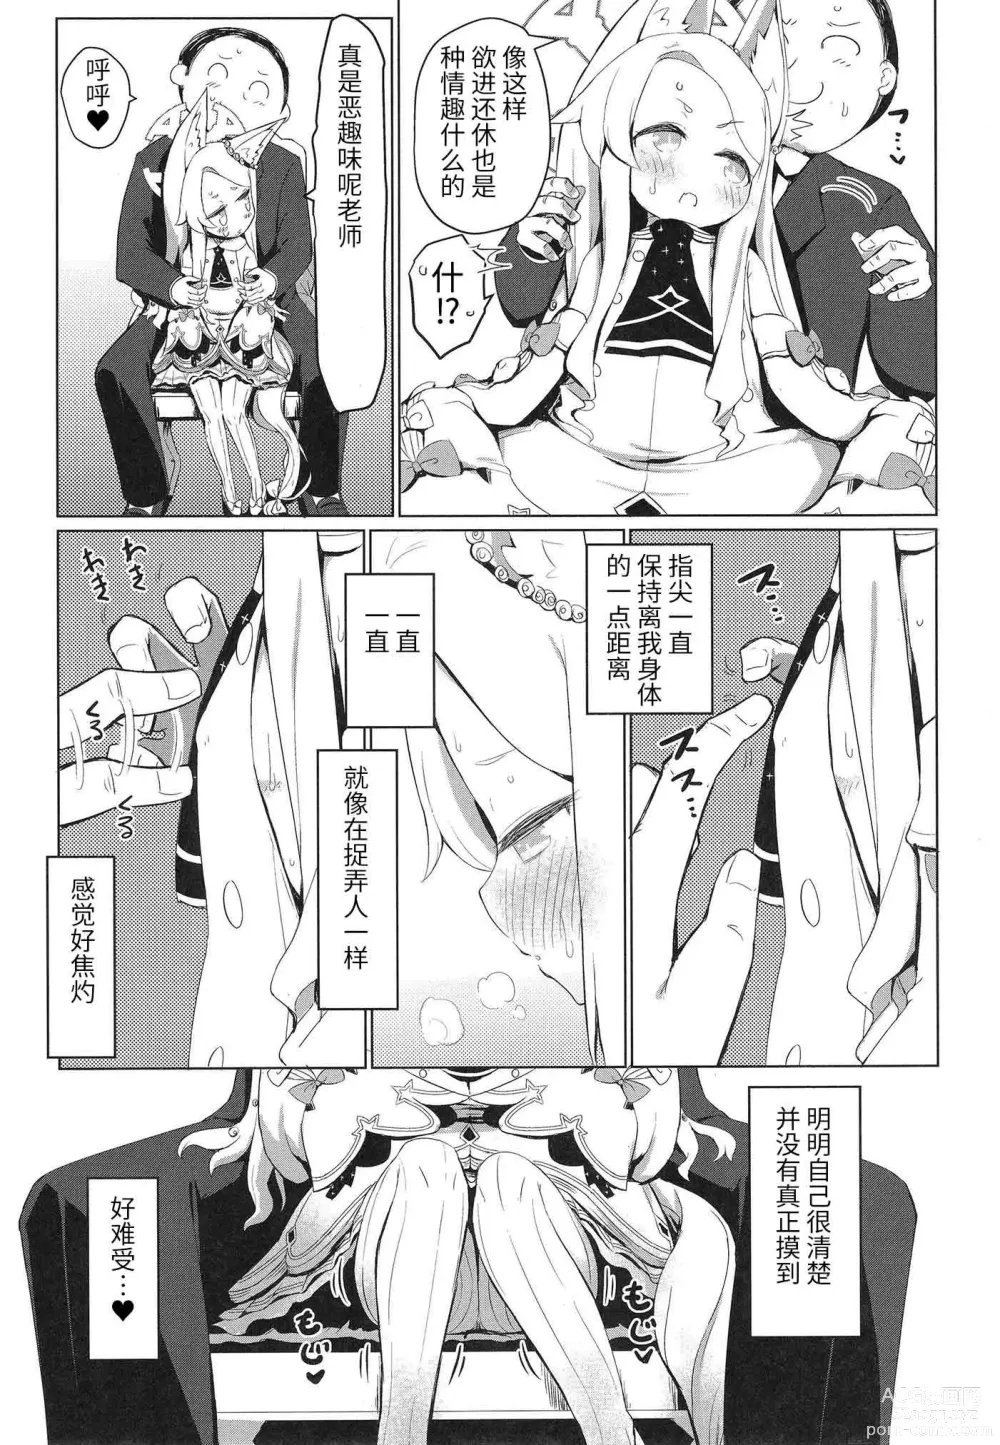 Page 9 of doujinshi 抱歉的发情圣娅